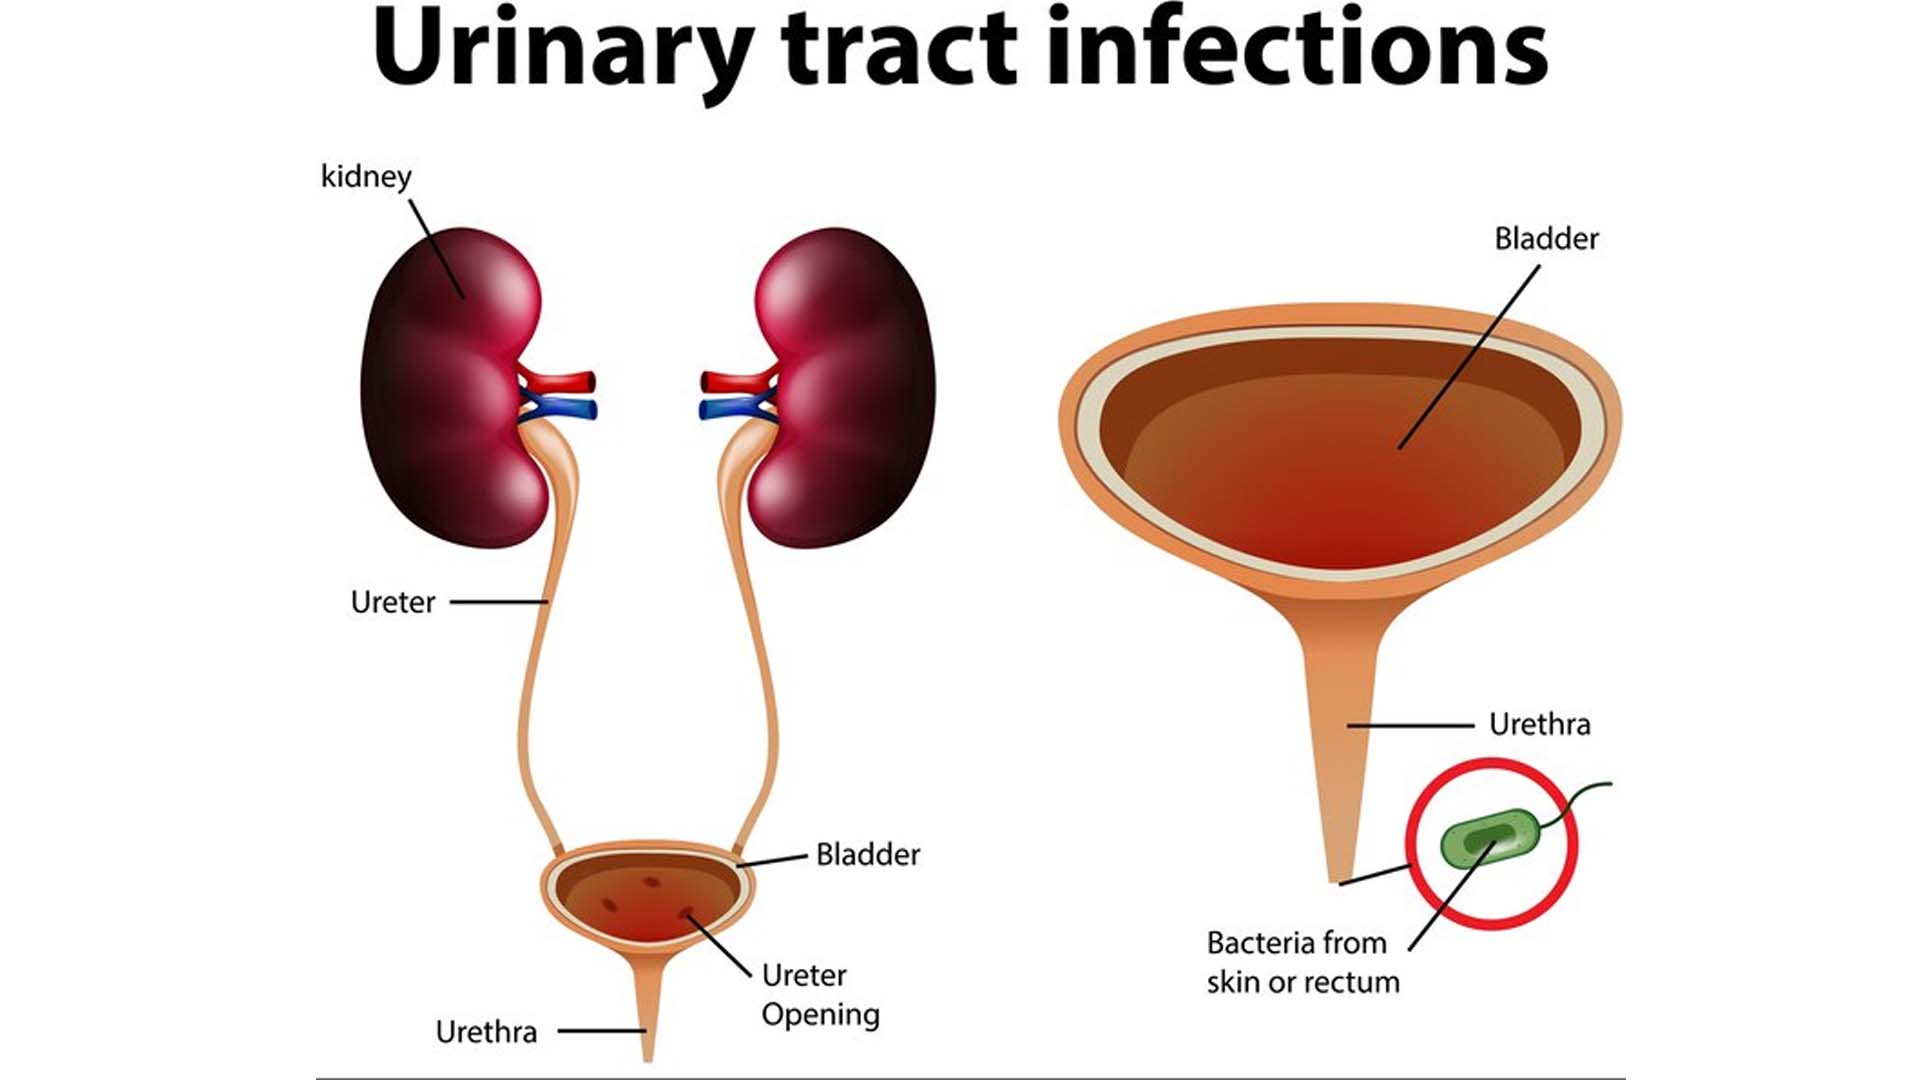 Urinary tract infections (UTIs)